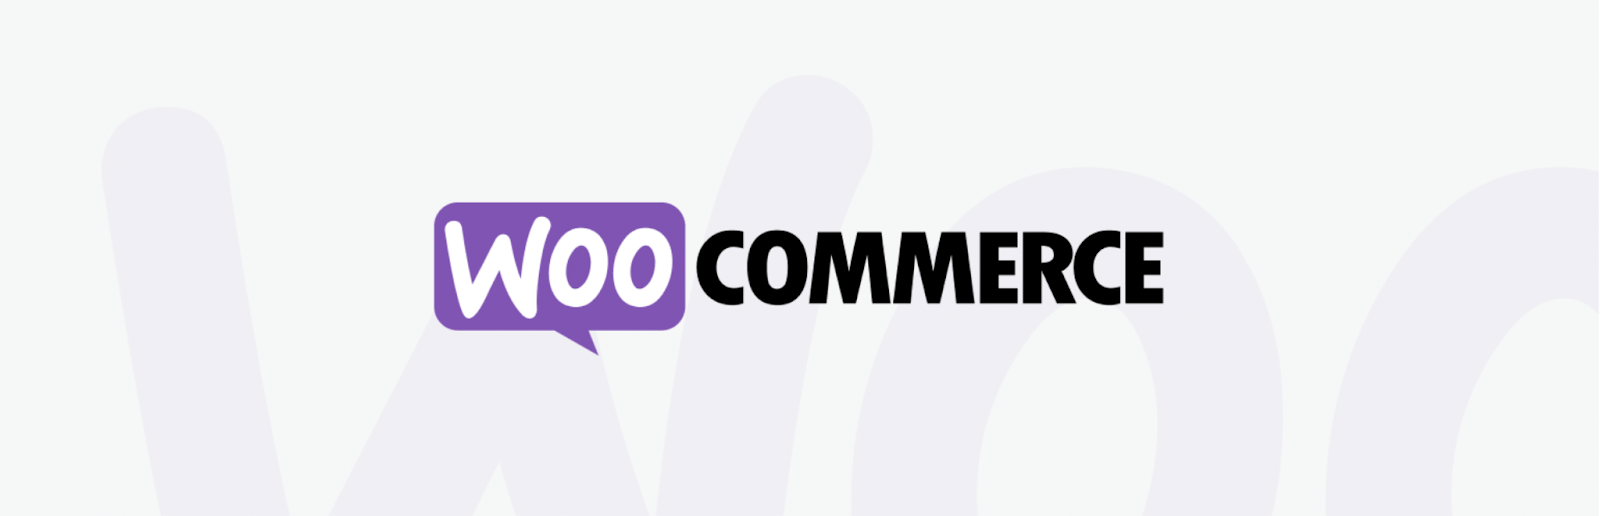 Picture of Woo (formerly known as WooCommerce) logo, which transforms your auction site into an e-commerce hub. 